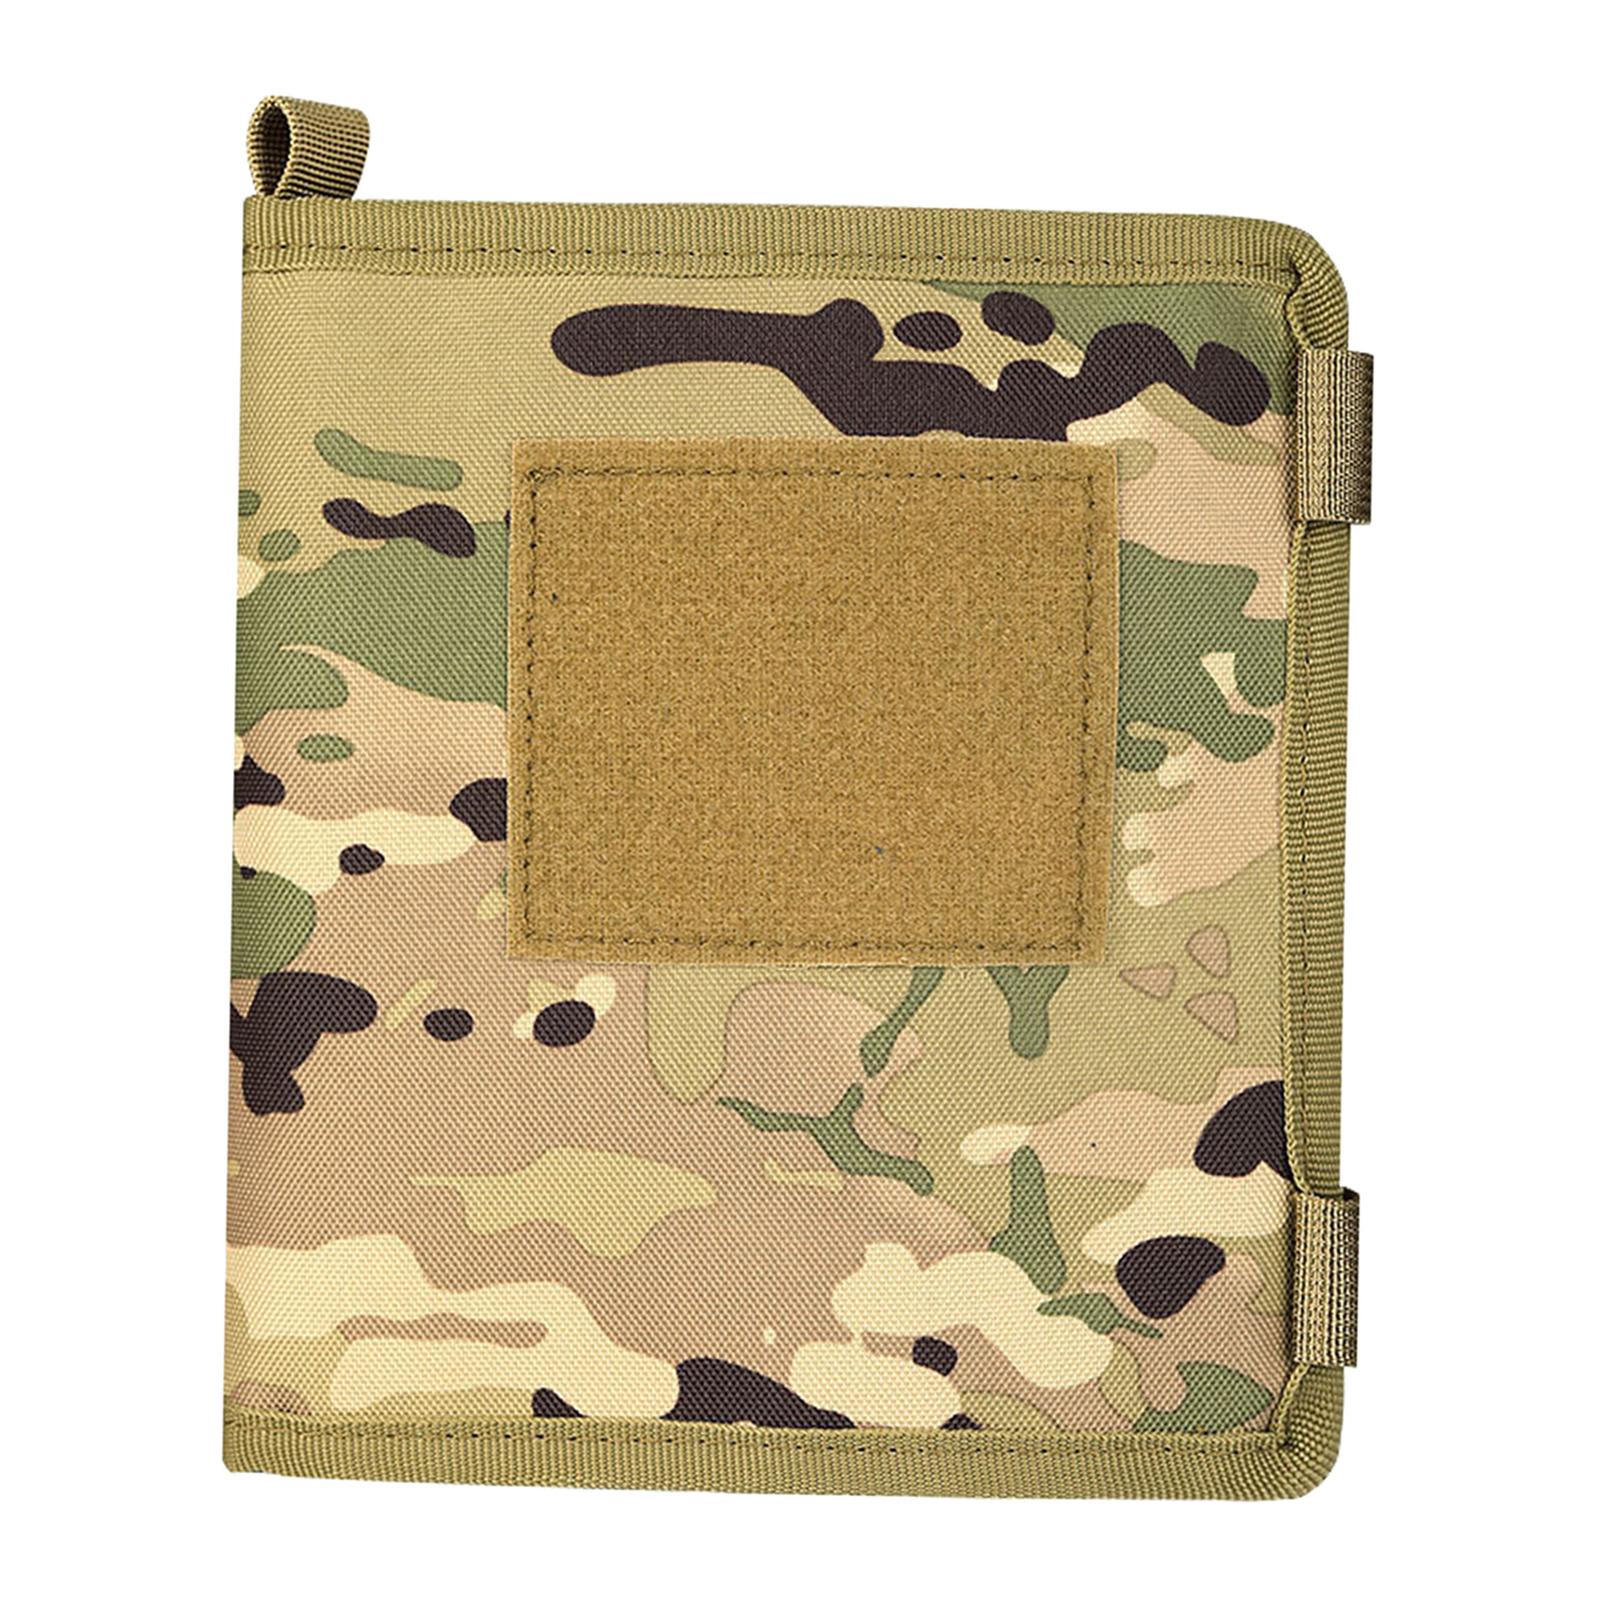 Map Bag Map Pocket Case for Camping Travel Outdoor Activities